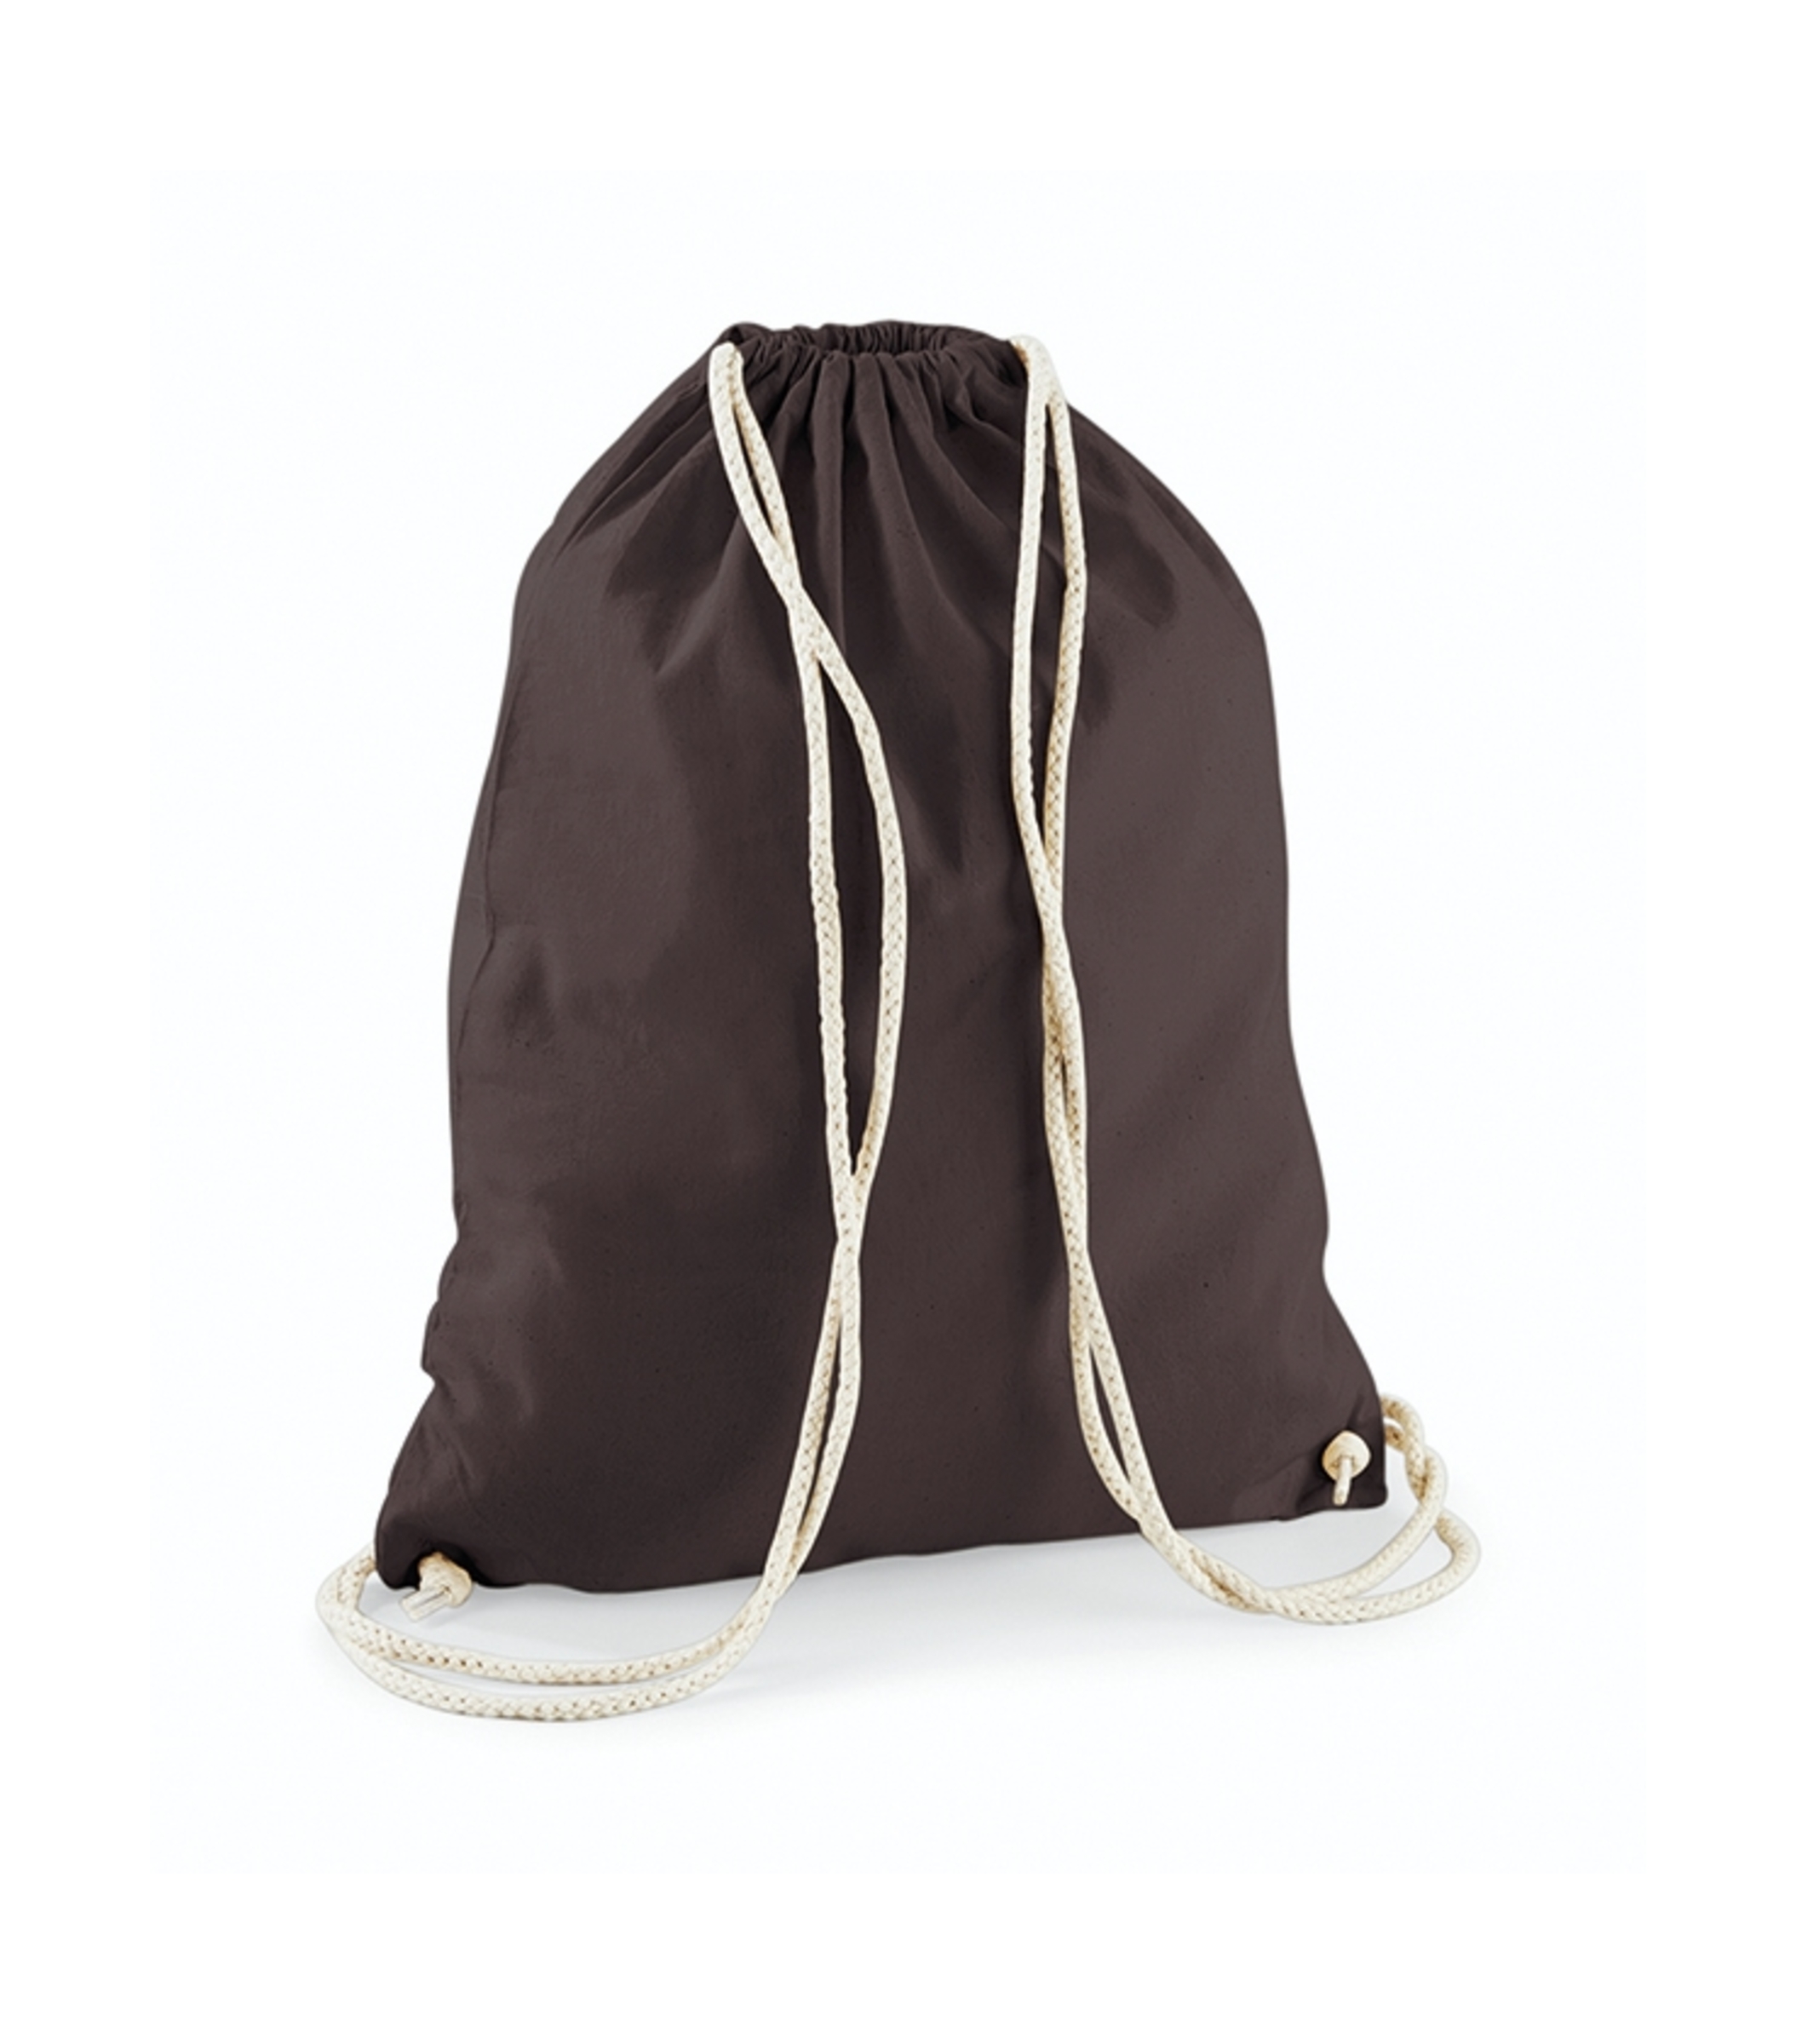 Westford Mill Cotton Gymsack - Chocolate - One Size